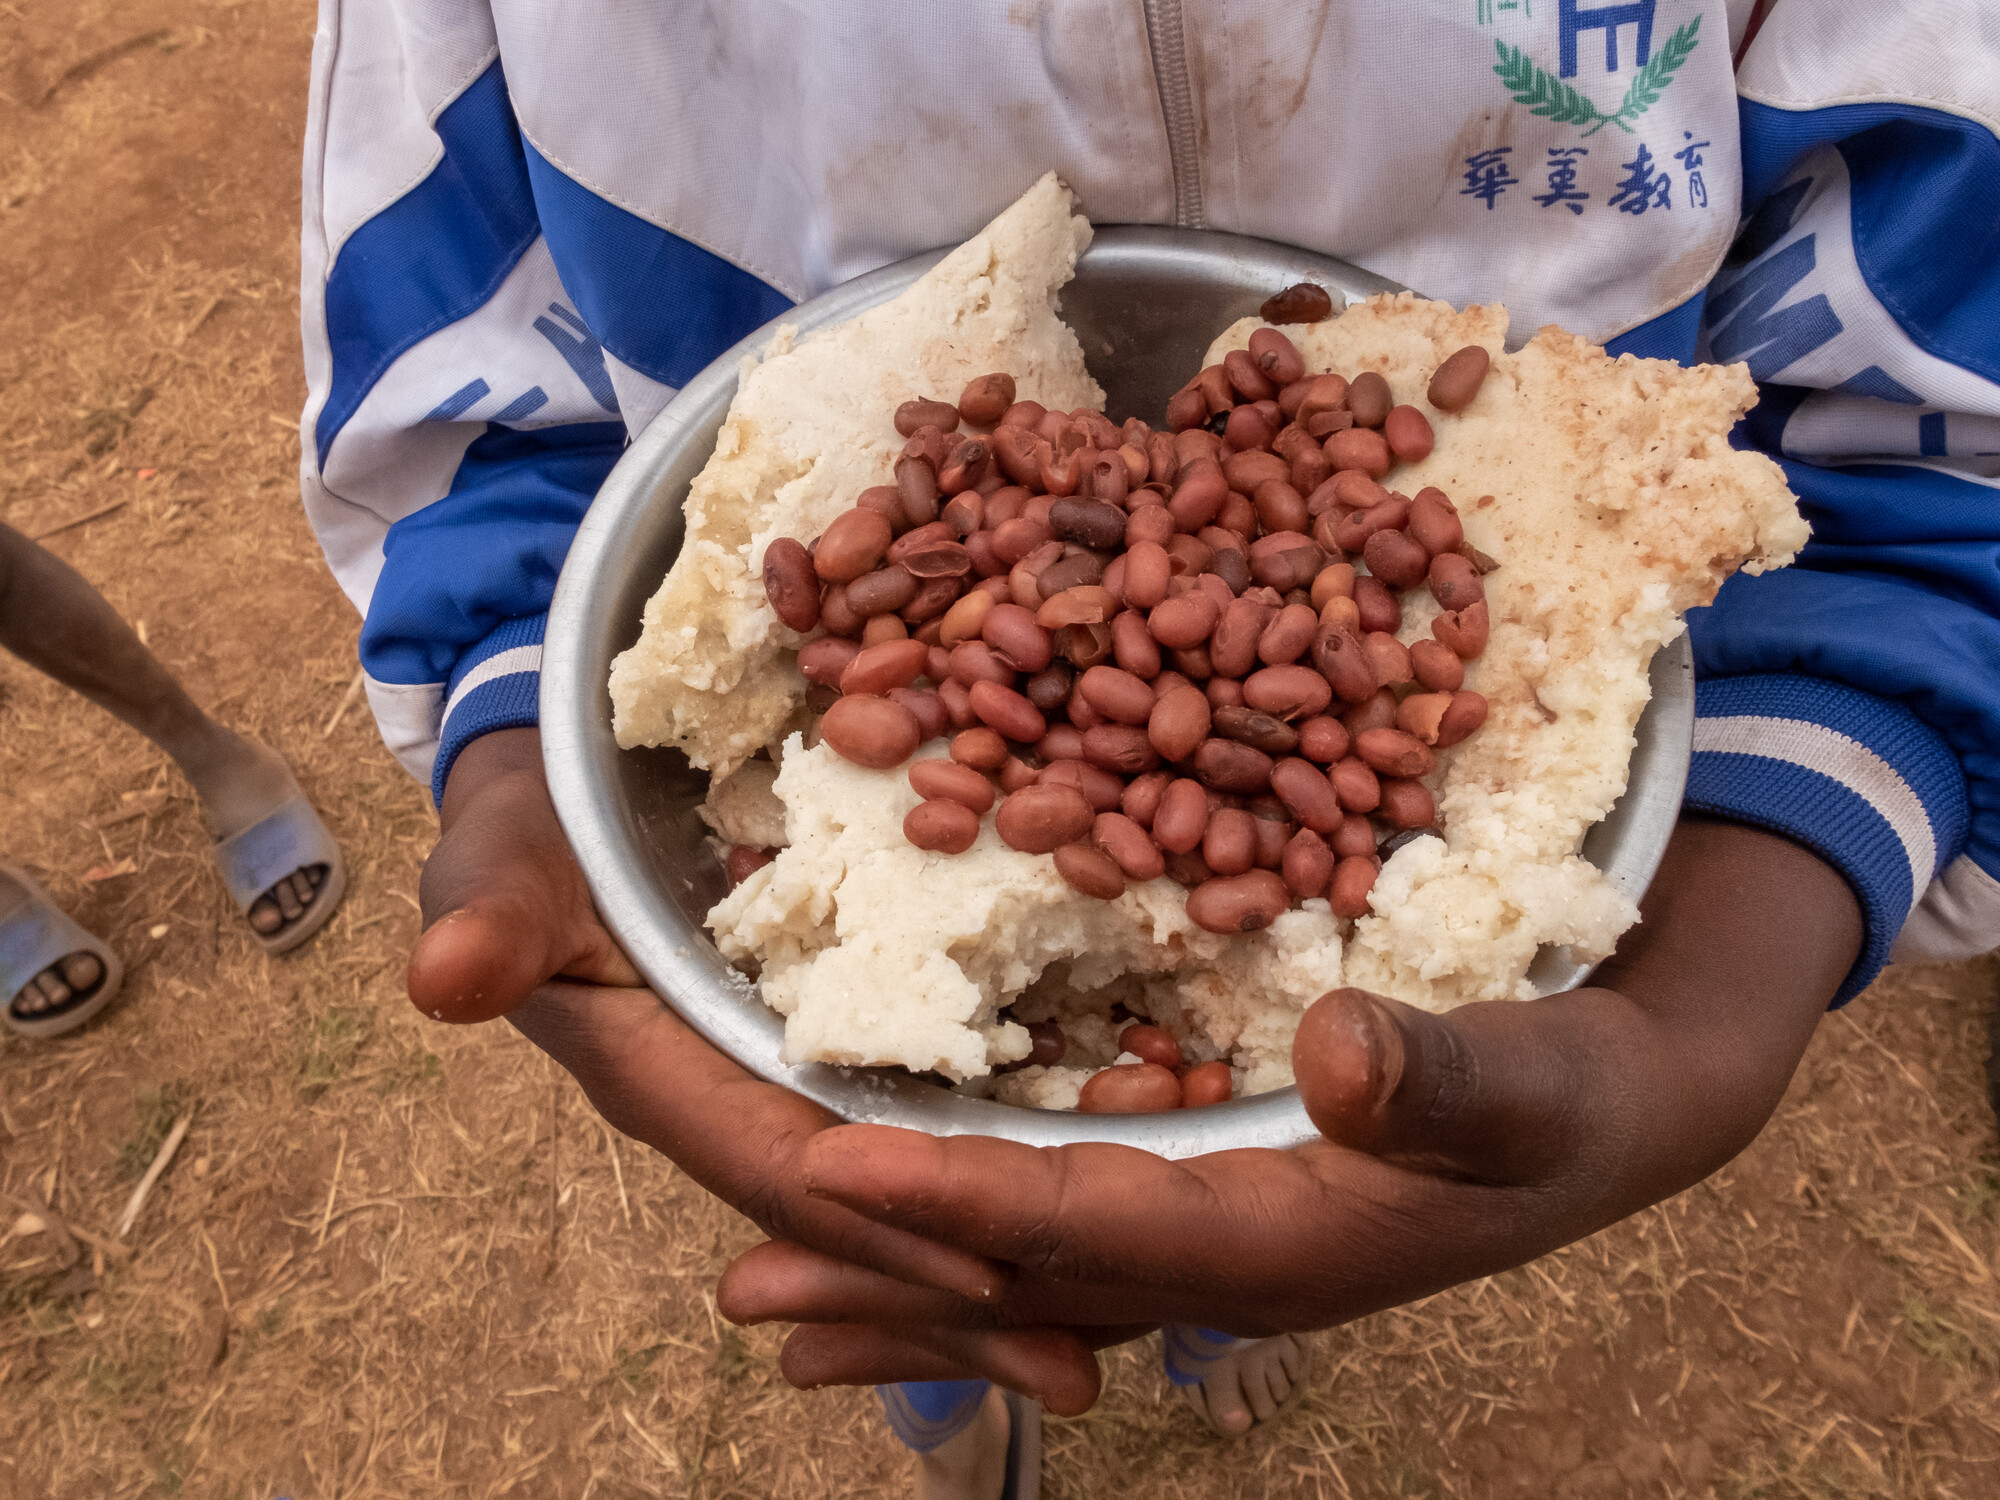 A Ugandan child holding a bowl of cooked maize and beans